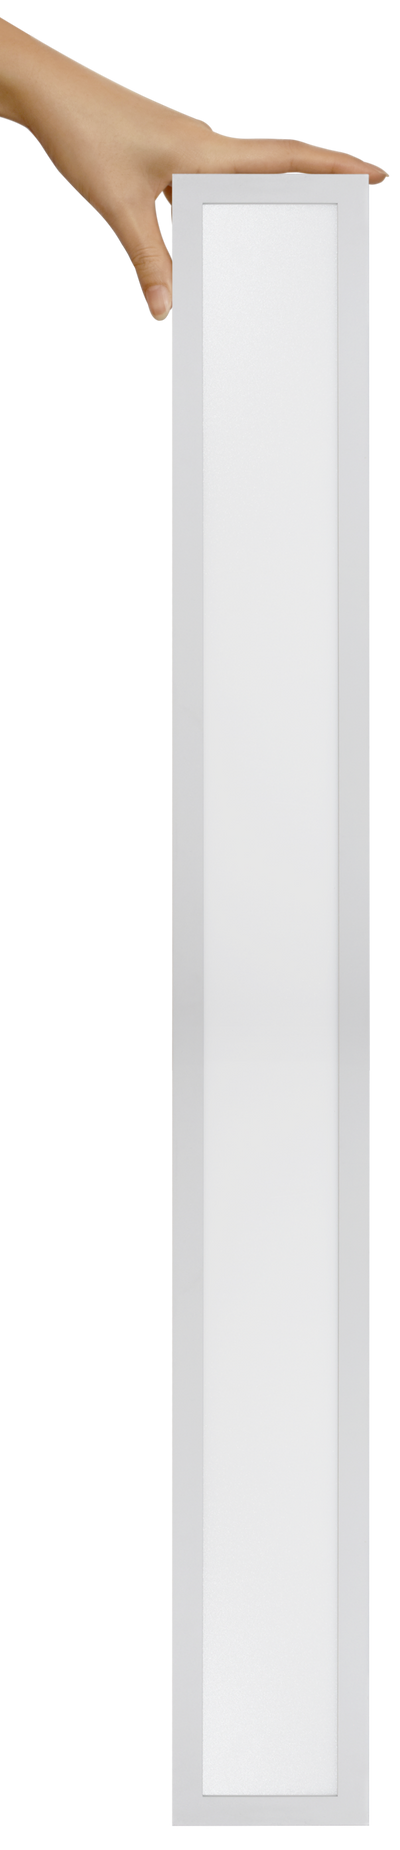 4FT Slim 4" Linear Surface Light, 3400 Lumen Max, Wattage and CCT Selectable, 110-277V